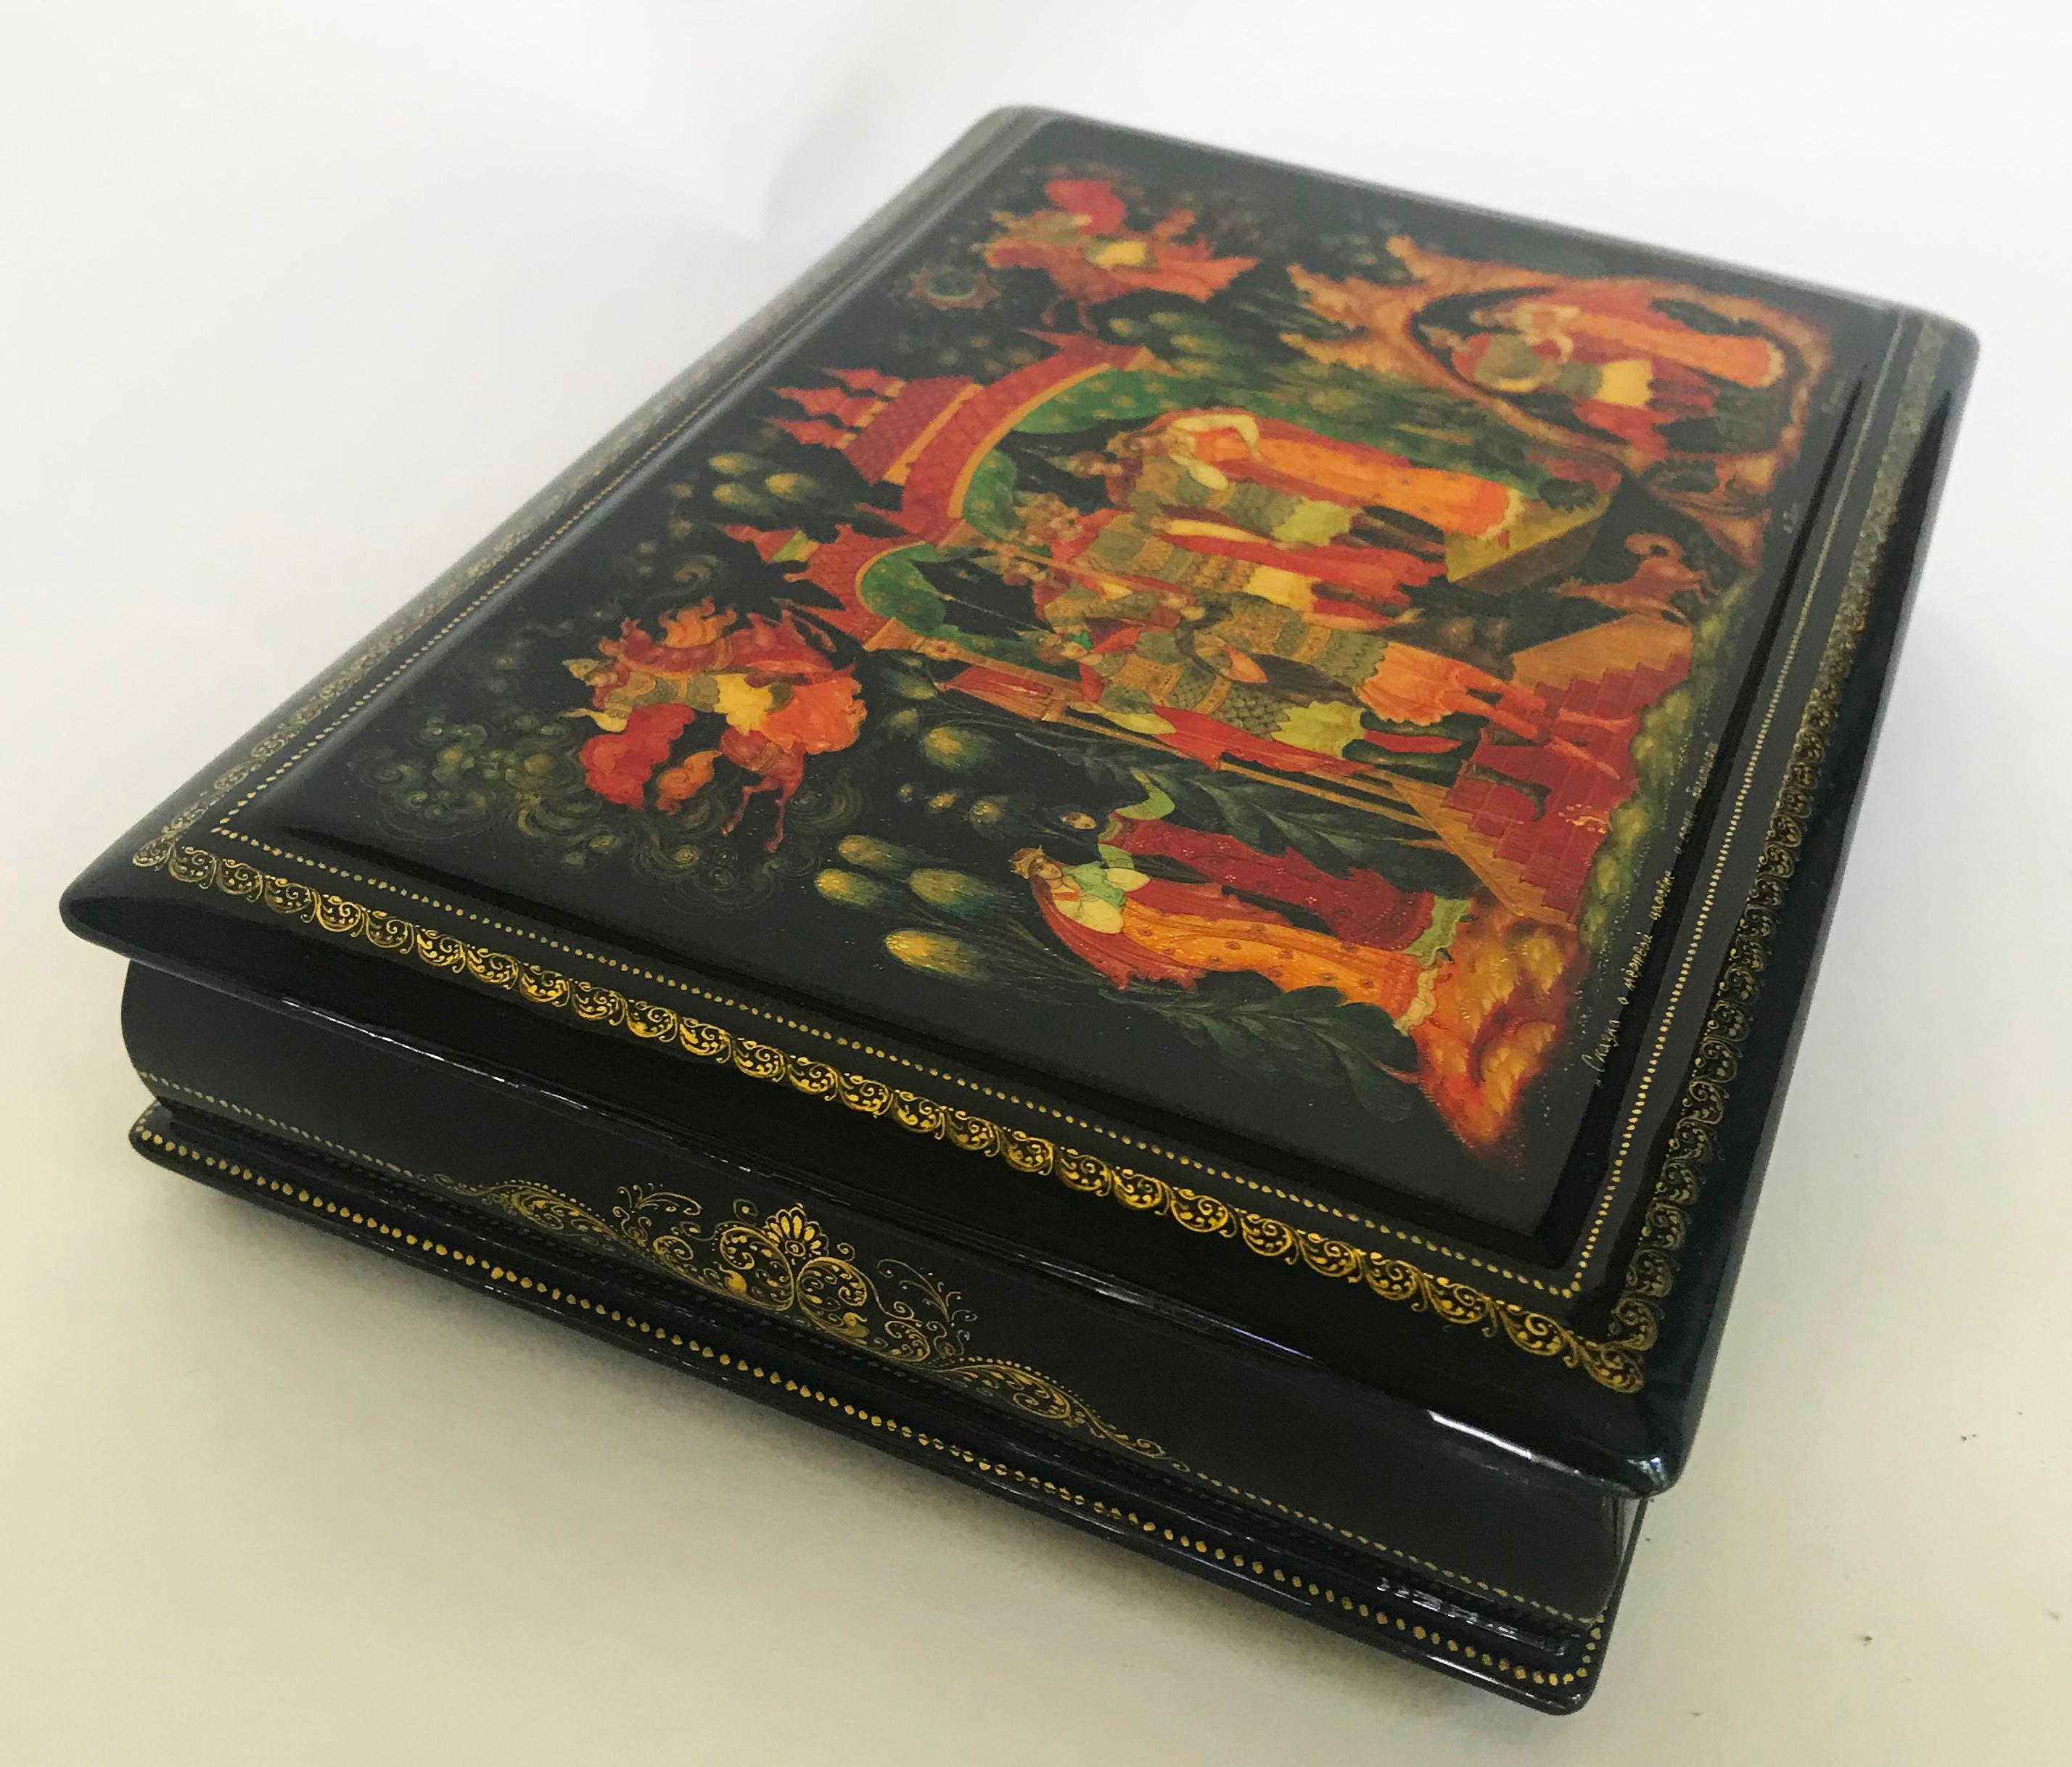 Artisan Fine Russian Lacquer Vanity Box from Palekh with Gold Leaf Painting